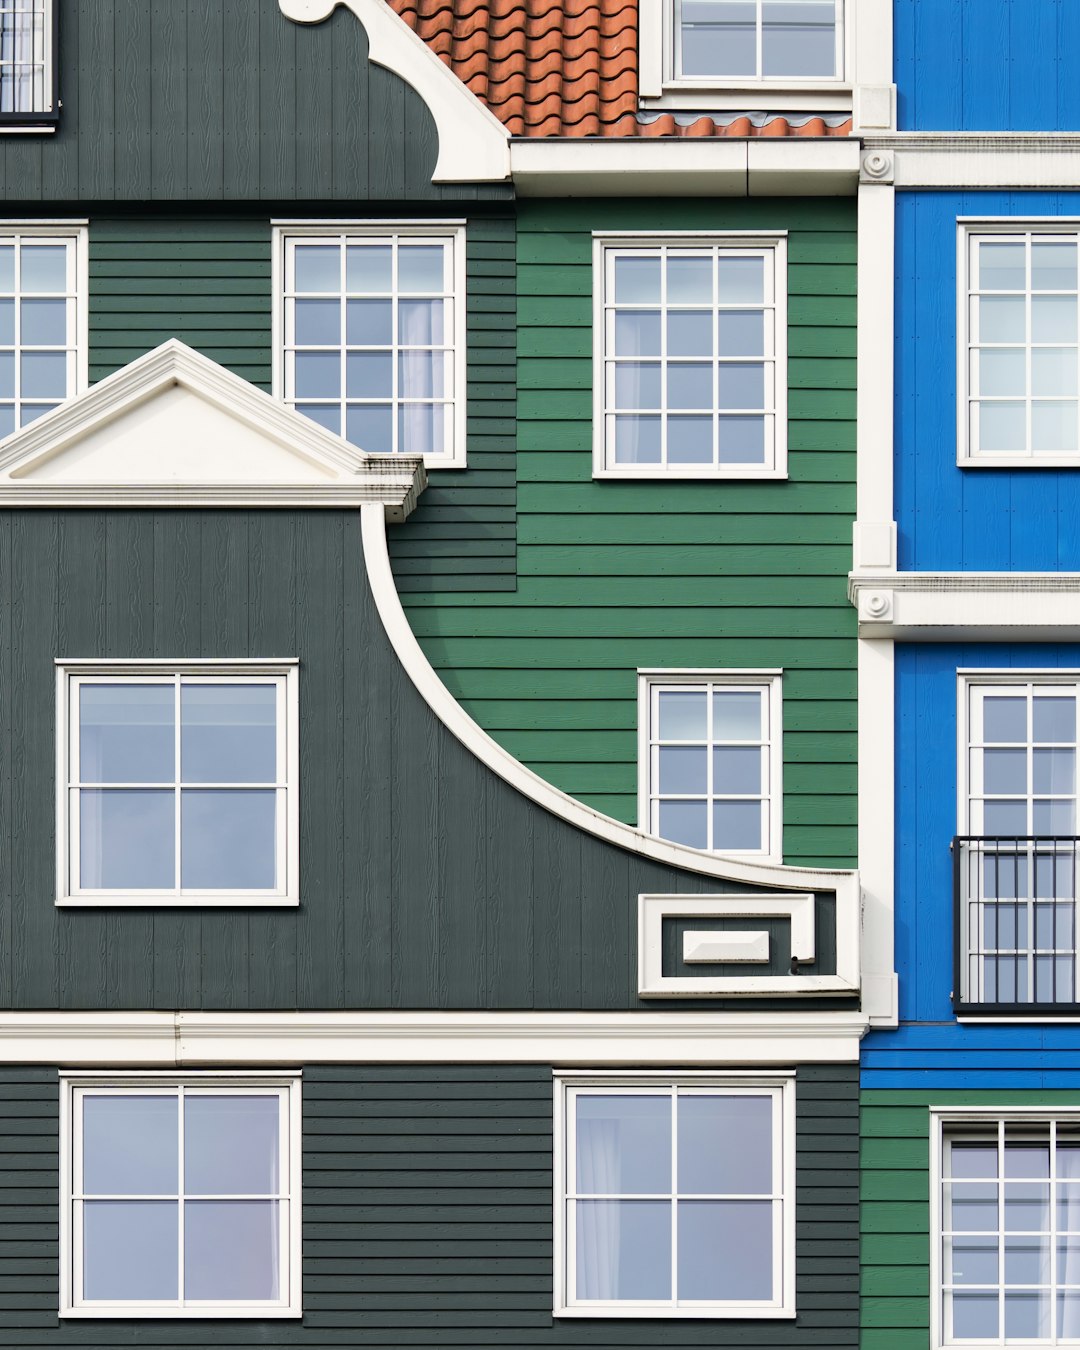 Revamp Your Homes Curb Appeal With a Professional House Painting Service